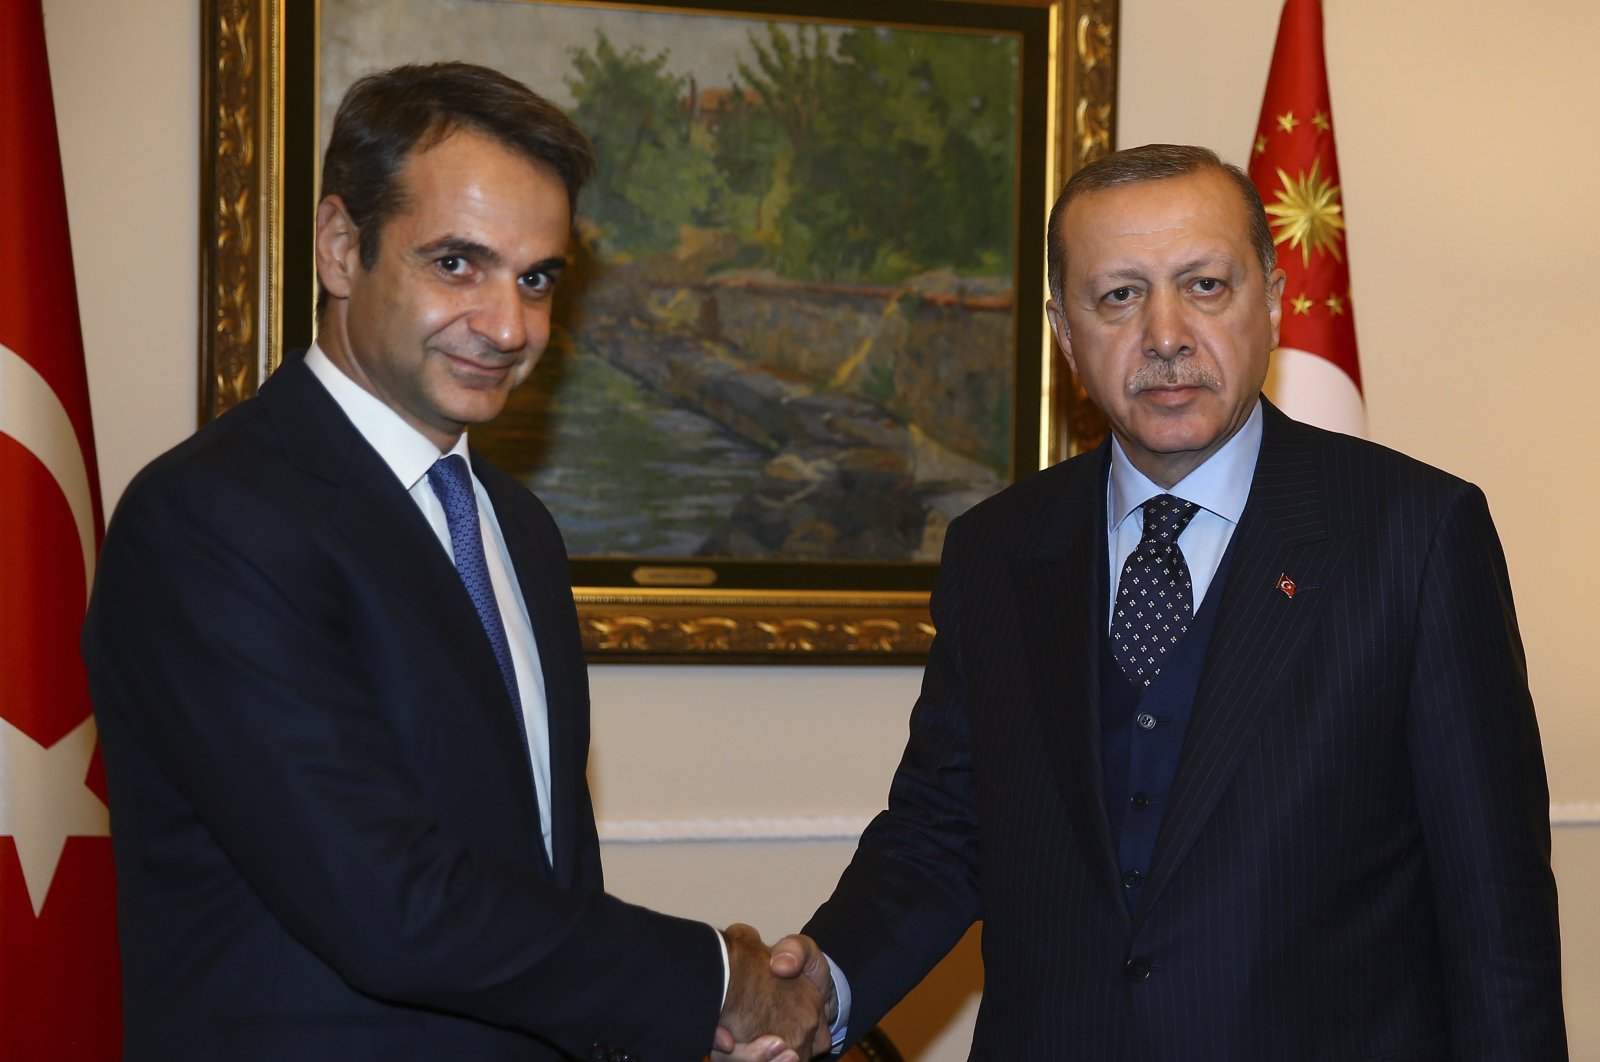 Turkey's President Recep Tayyip Erdoğan, right, on a two-day official visit to Greece, meets Kyriakos Mitsotakis, left, leader of the main opposition New Democracy party in Athens, Thursday, Dec. 7, 2017. (AP File Photo)